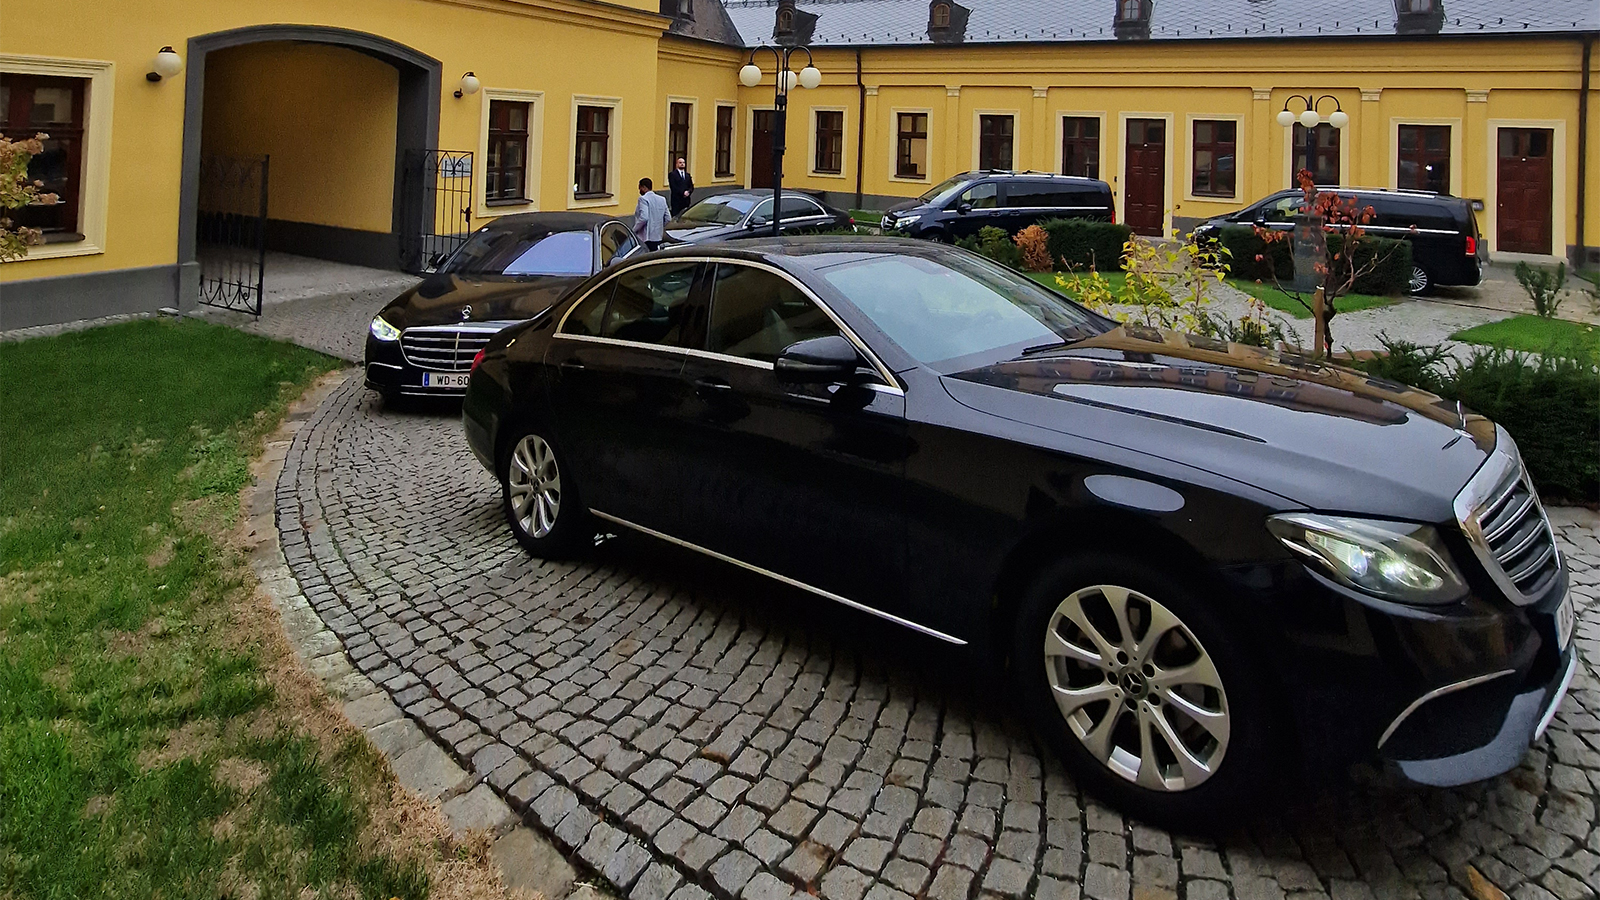 embassy chauffeur services, diplomatic transportation, luxury embassy travel, professional chauffeurs, cross-border transfers, secure diplomatic transport